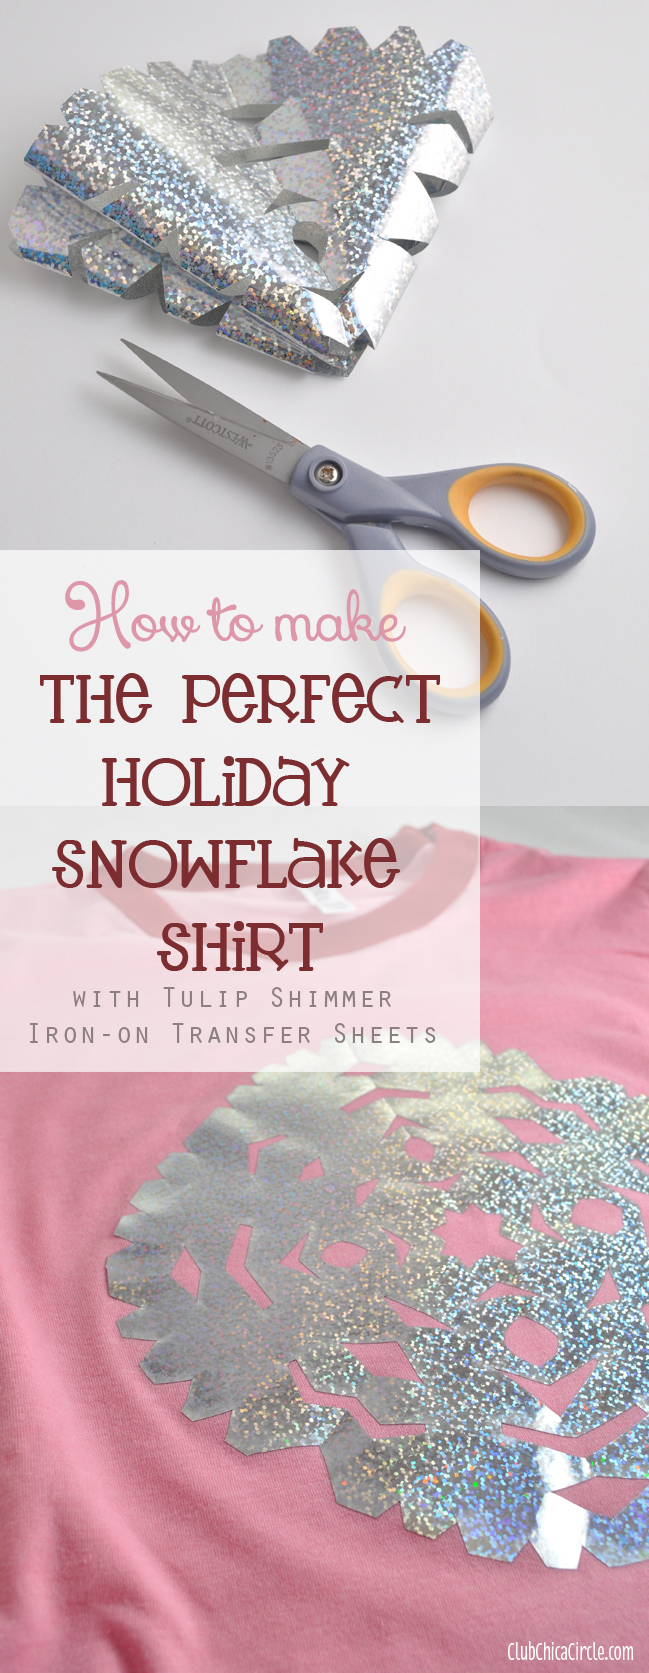 How to Make the Perfect Holiday Snowflake Shirt with Tulip